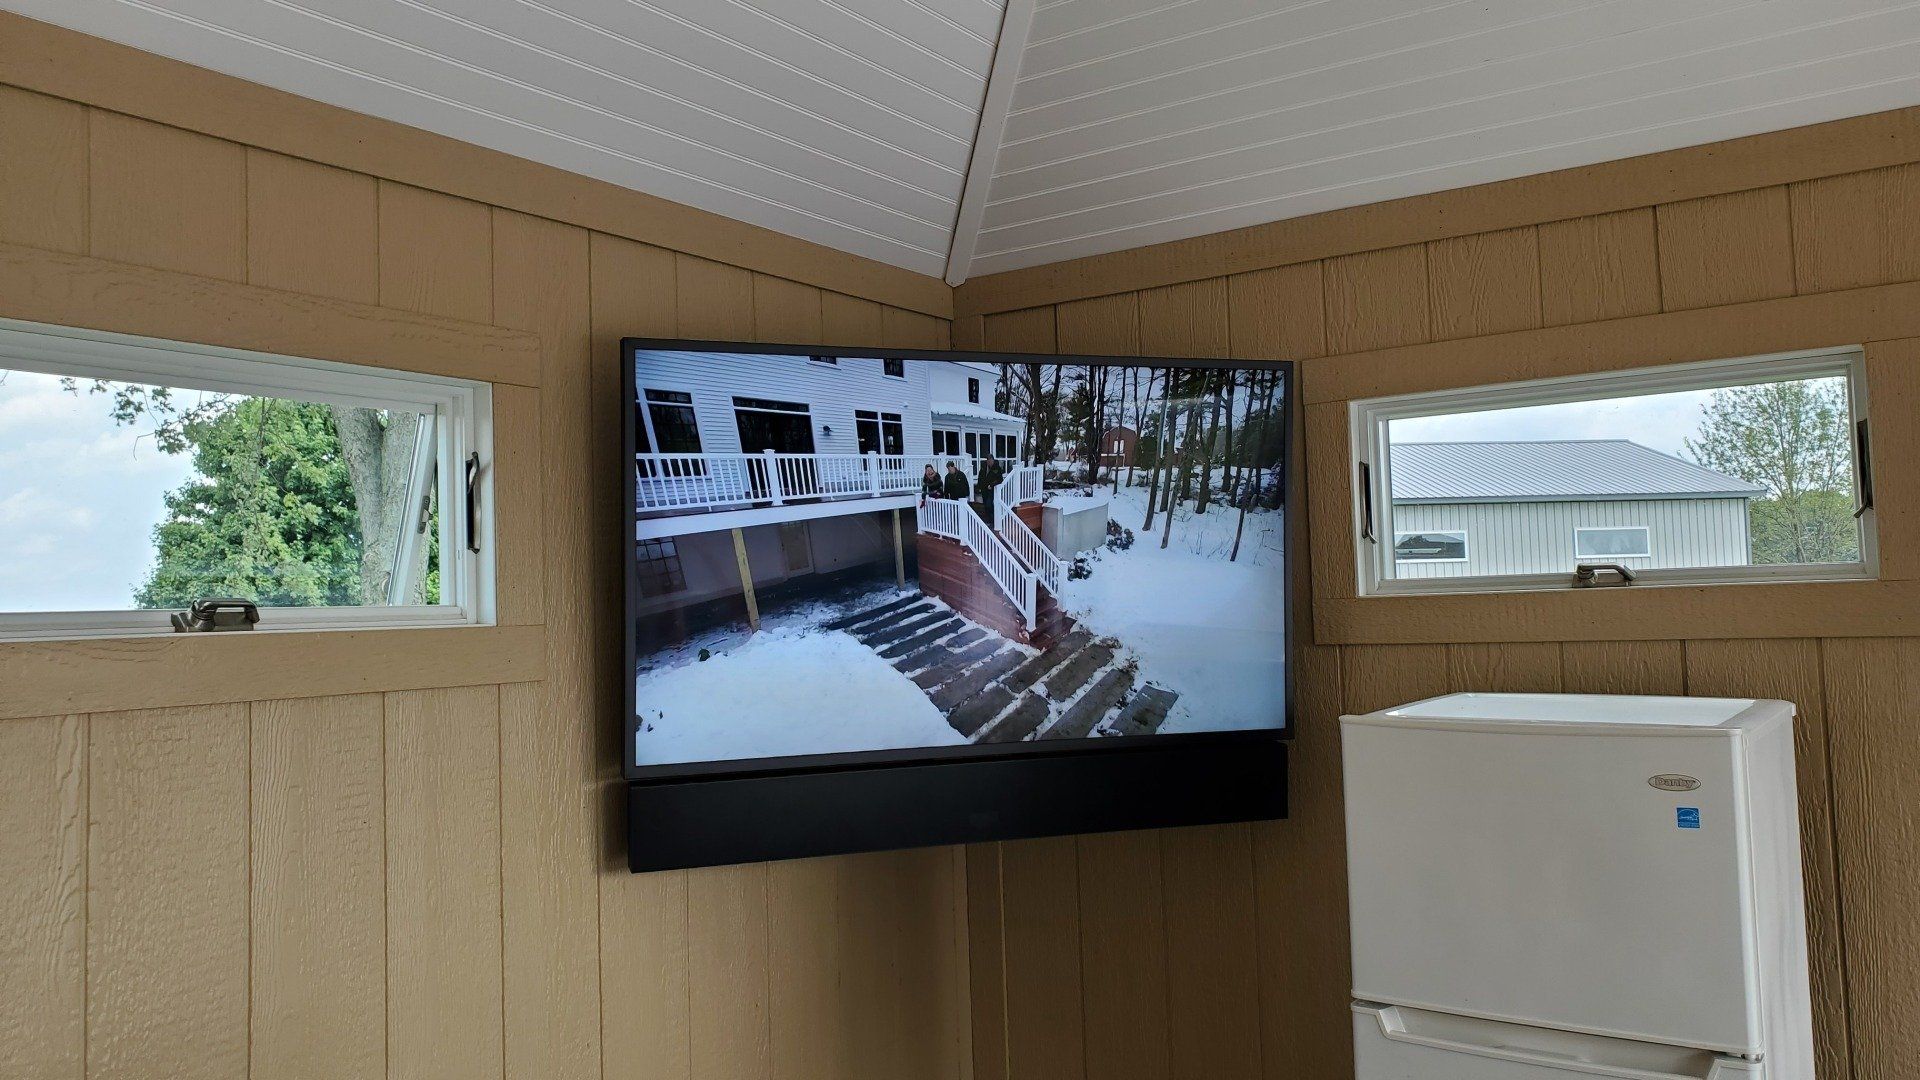 a samsung terrace outdoor television is mounted in a pool house with a outdoor soundbar below it